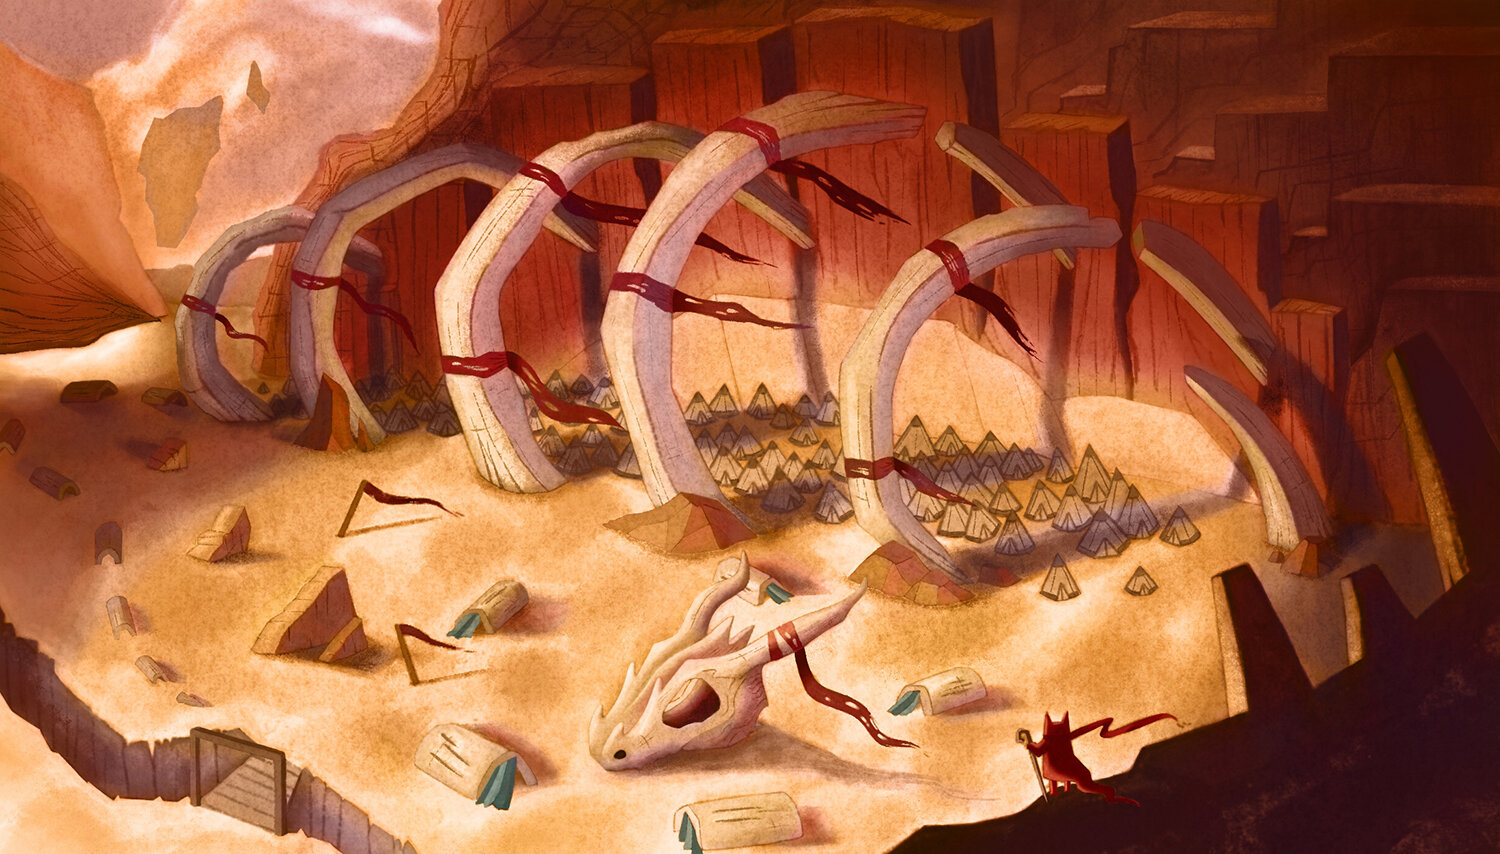 Development Sample of Toxic Valley Location for "Lost Sands" by Anna Vander Heide